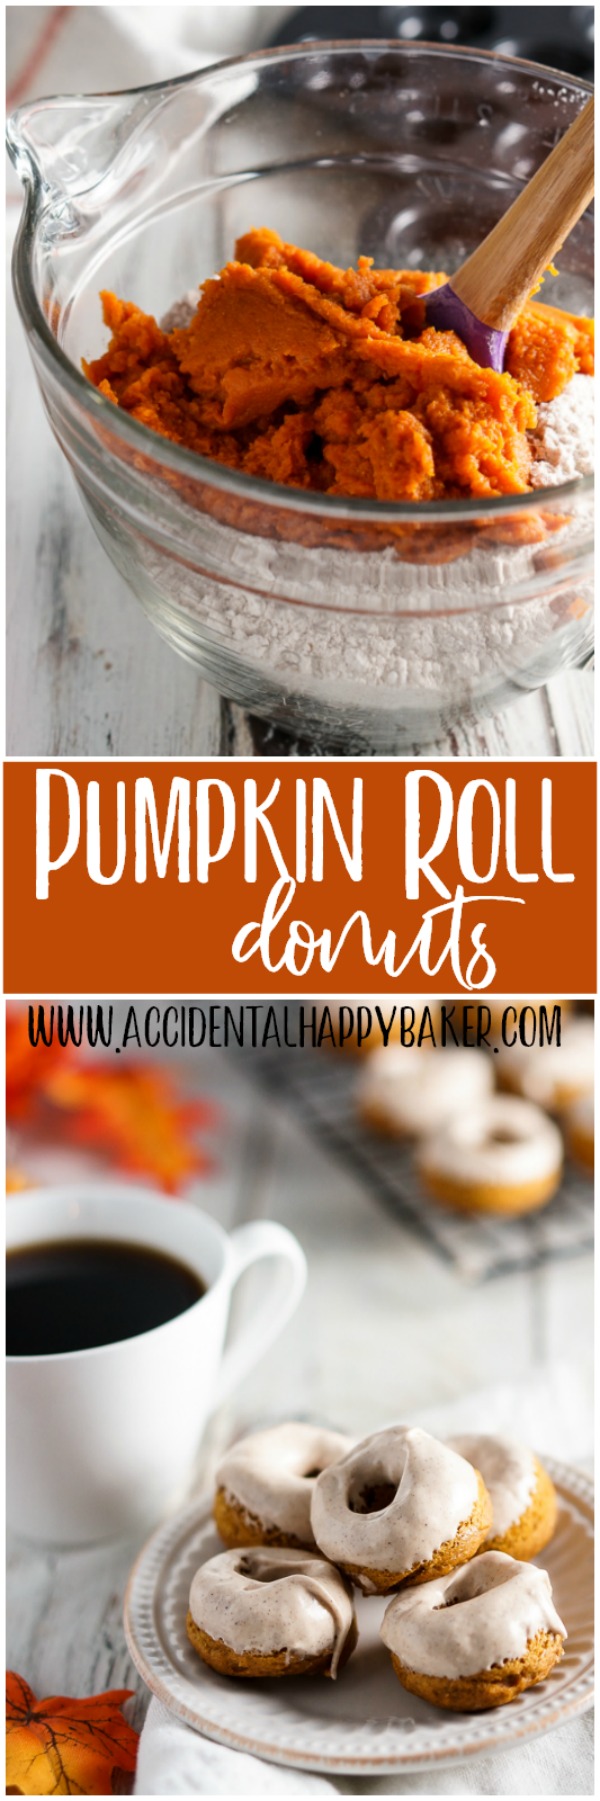 Pumpkin Roll Donuts, Bite-sized, spiced just right pumpkin donuts are topped with a cinnamon cream cheese glaze to  create perfectly poppable pumpkin roll donuts. 